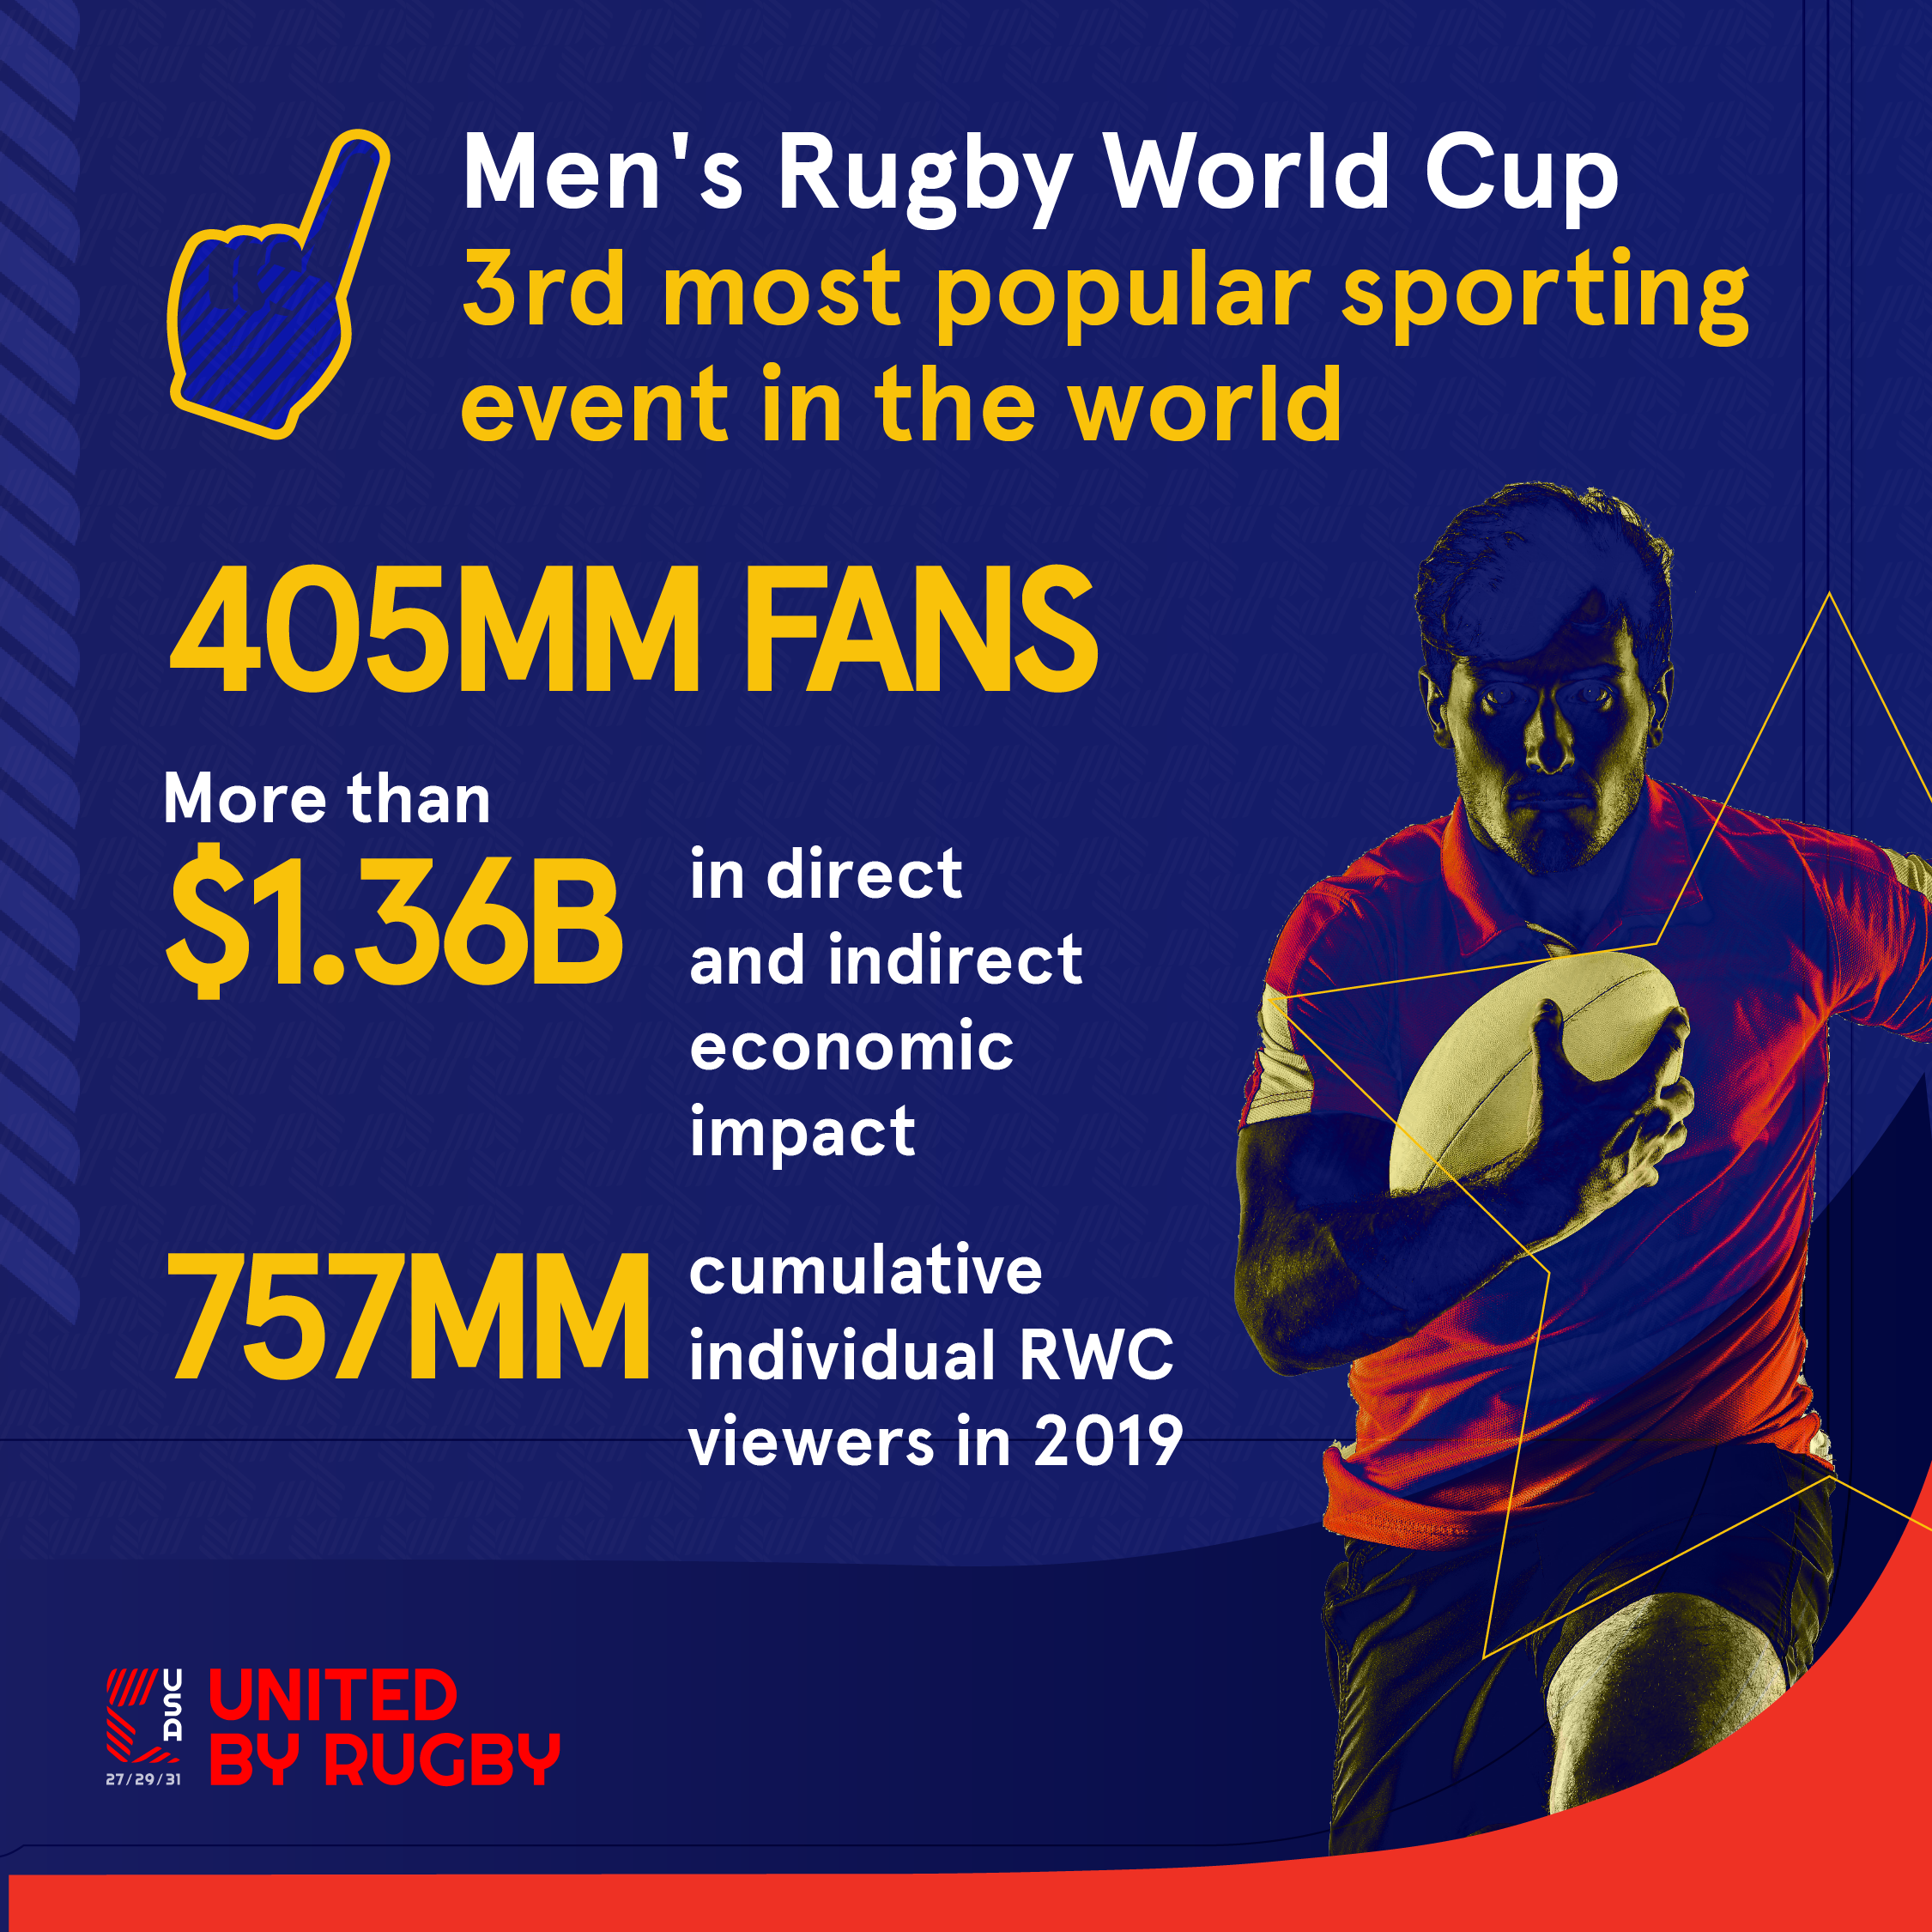 Mens Rugby World Cup The Third Most Popular Sporting Event in the World